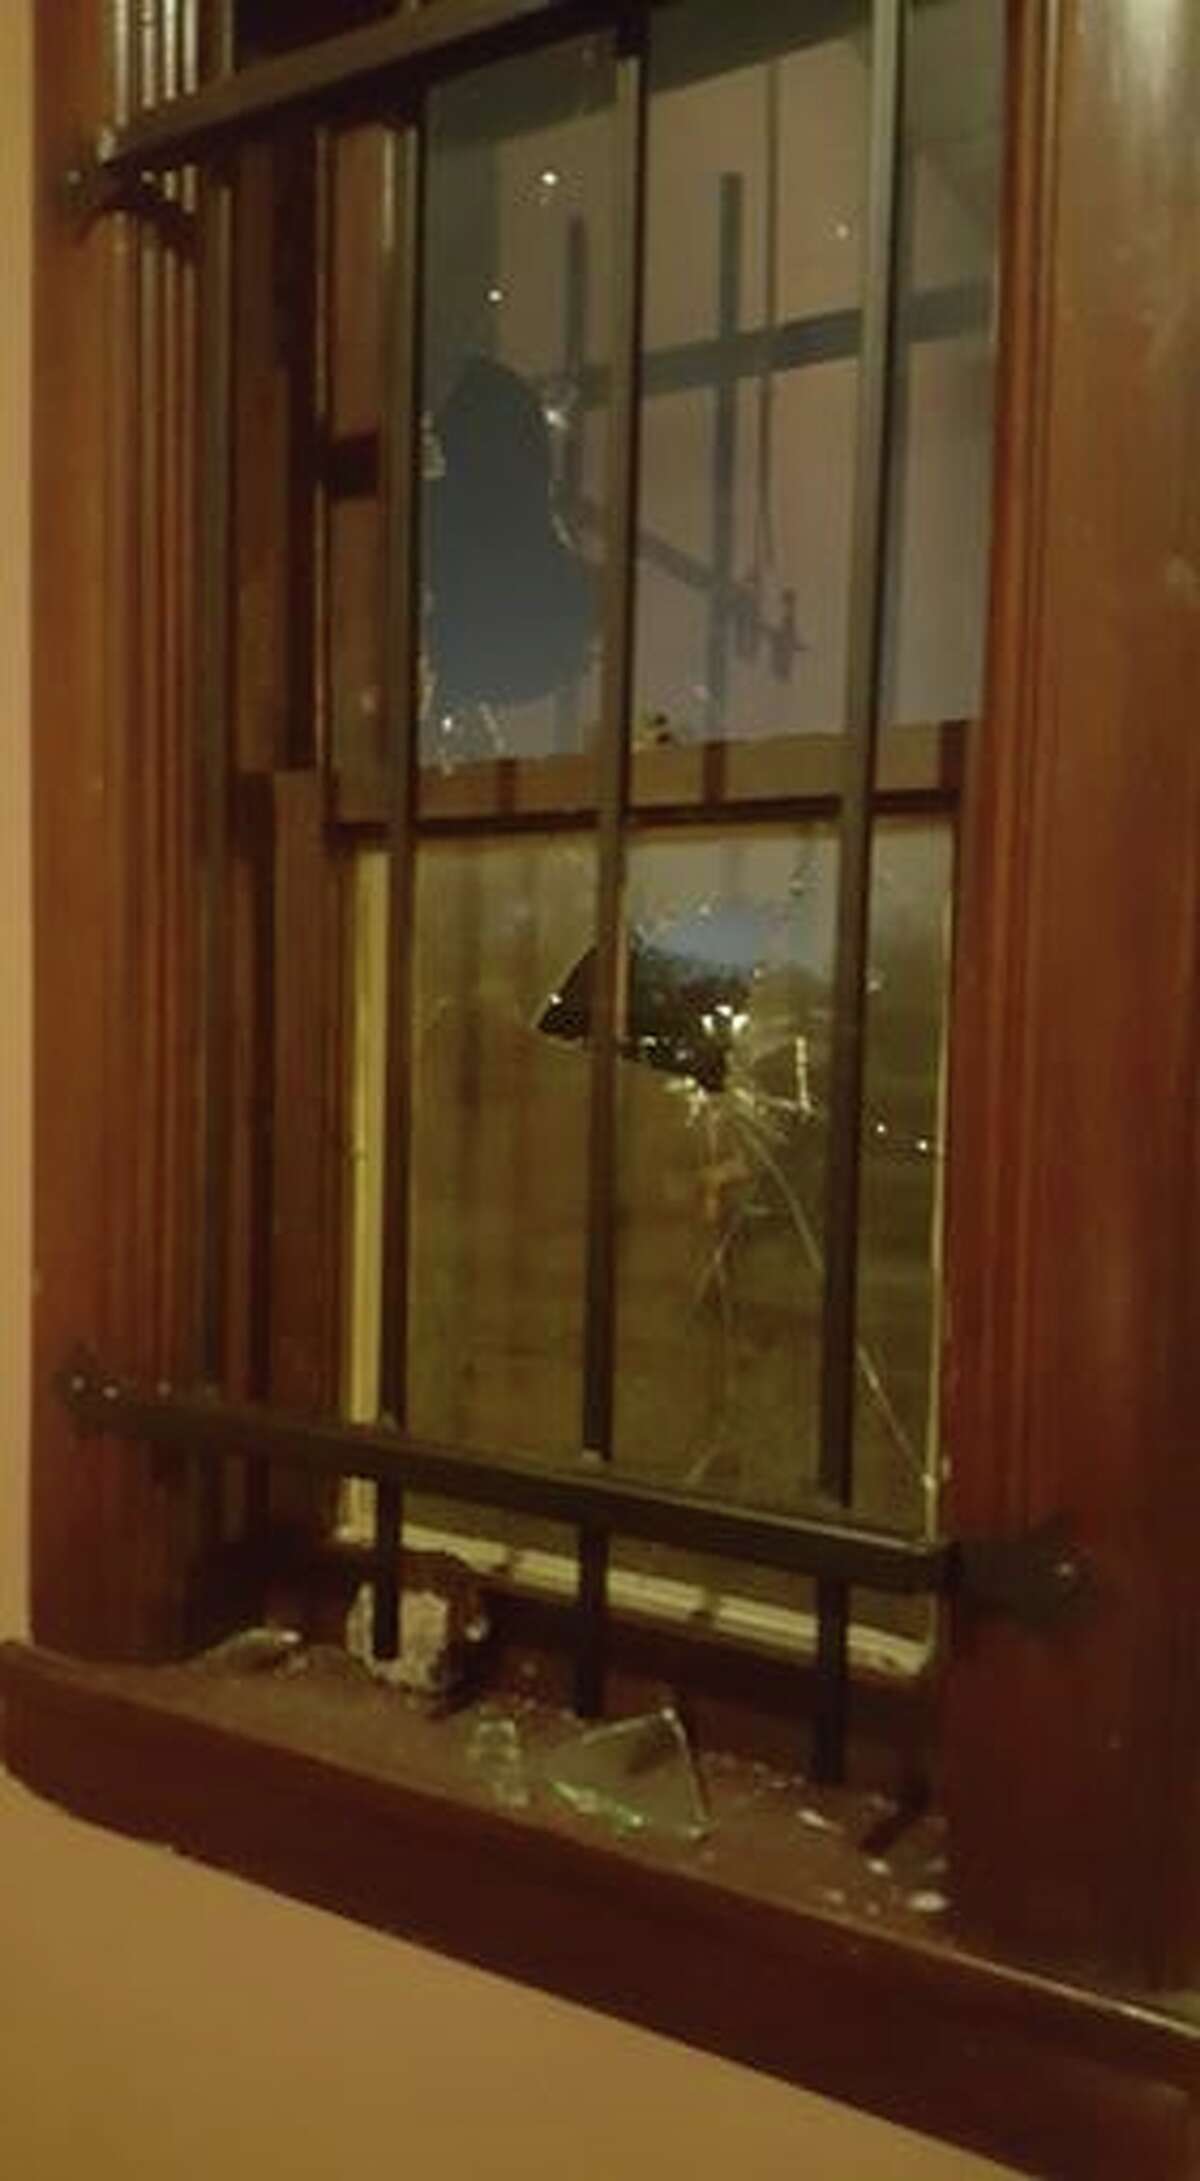 Temple Emanuel, in downtown Beaumont, was vandalized Friday night before 6 p.m. service. Congregation president, Allison Nathan Getz, said this has happened several times within the past few months.